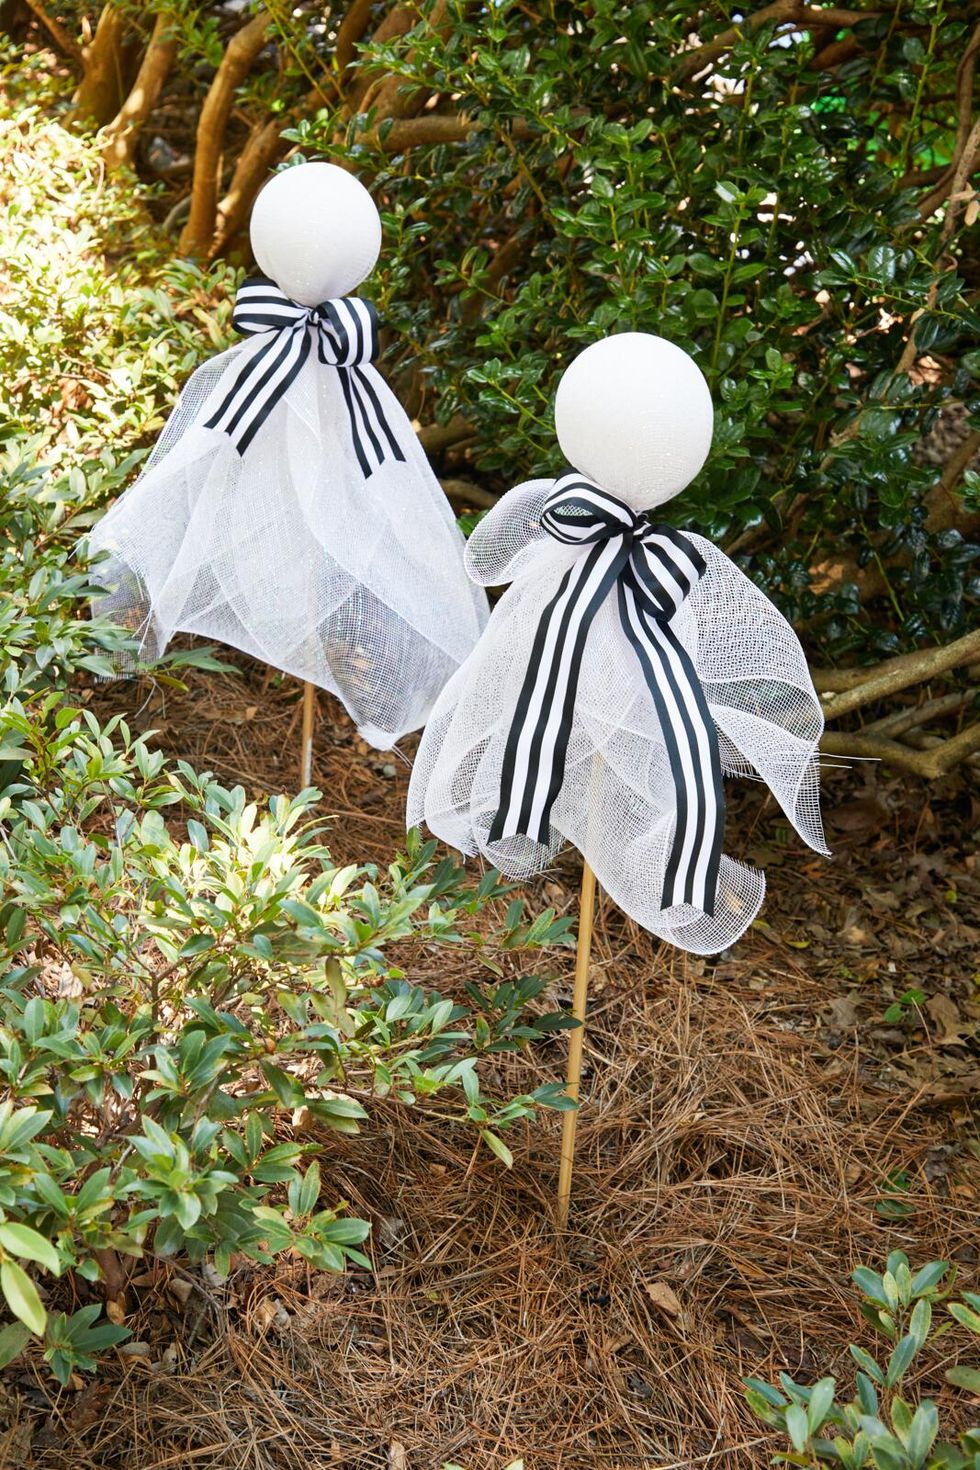 styrofoam balls with stakes intserted in the bottom wrapped in large glittery ribbon to look like ghosts